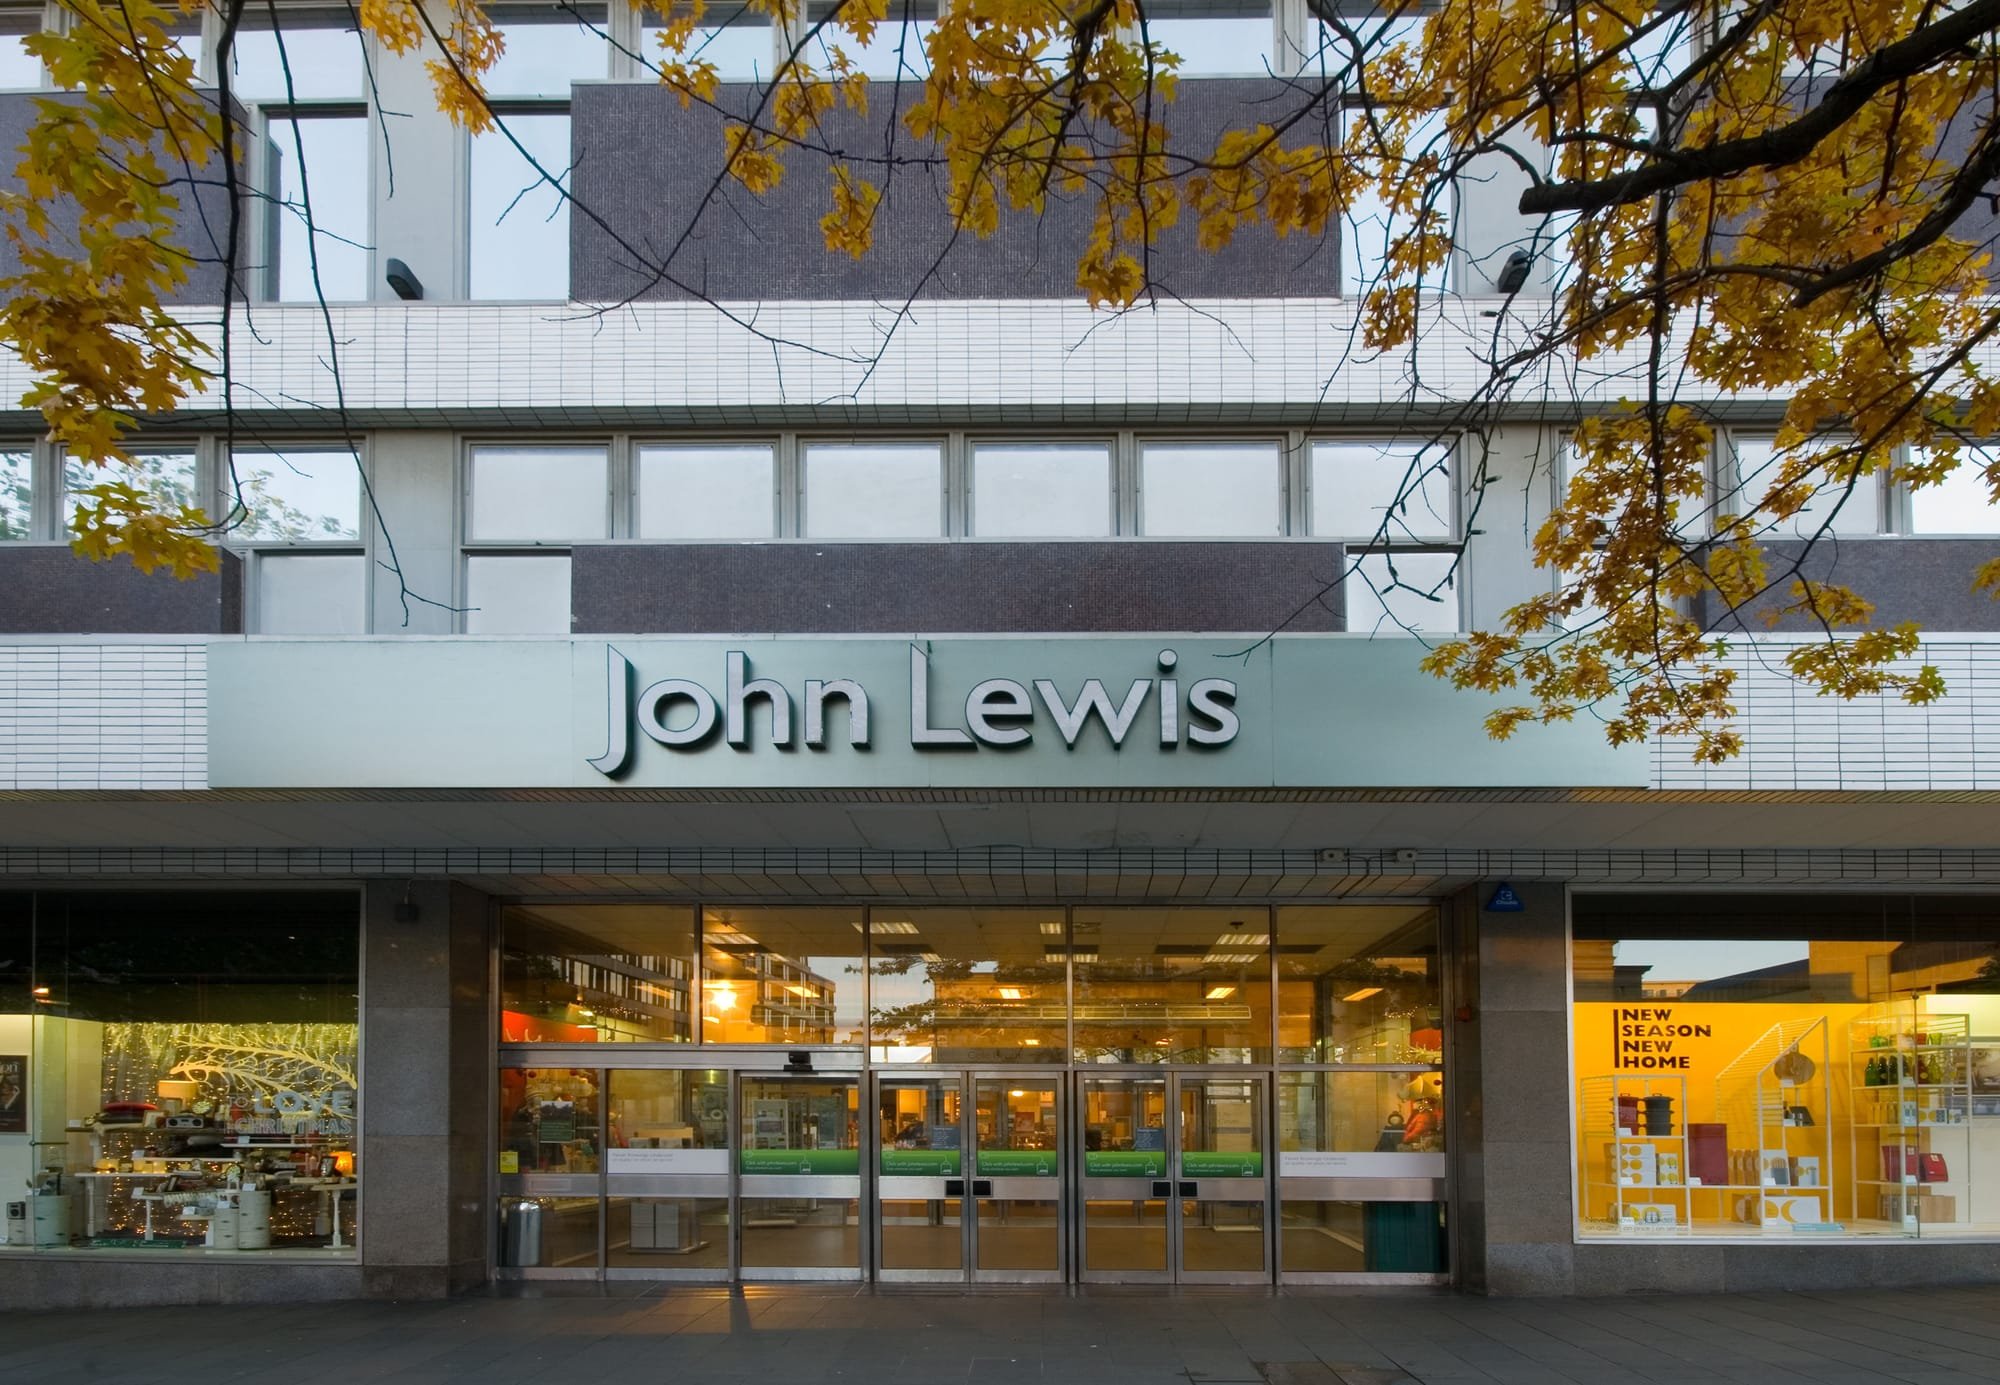 Plans for the John Lewis Building revealed